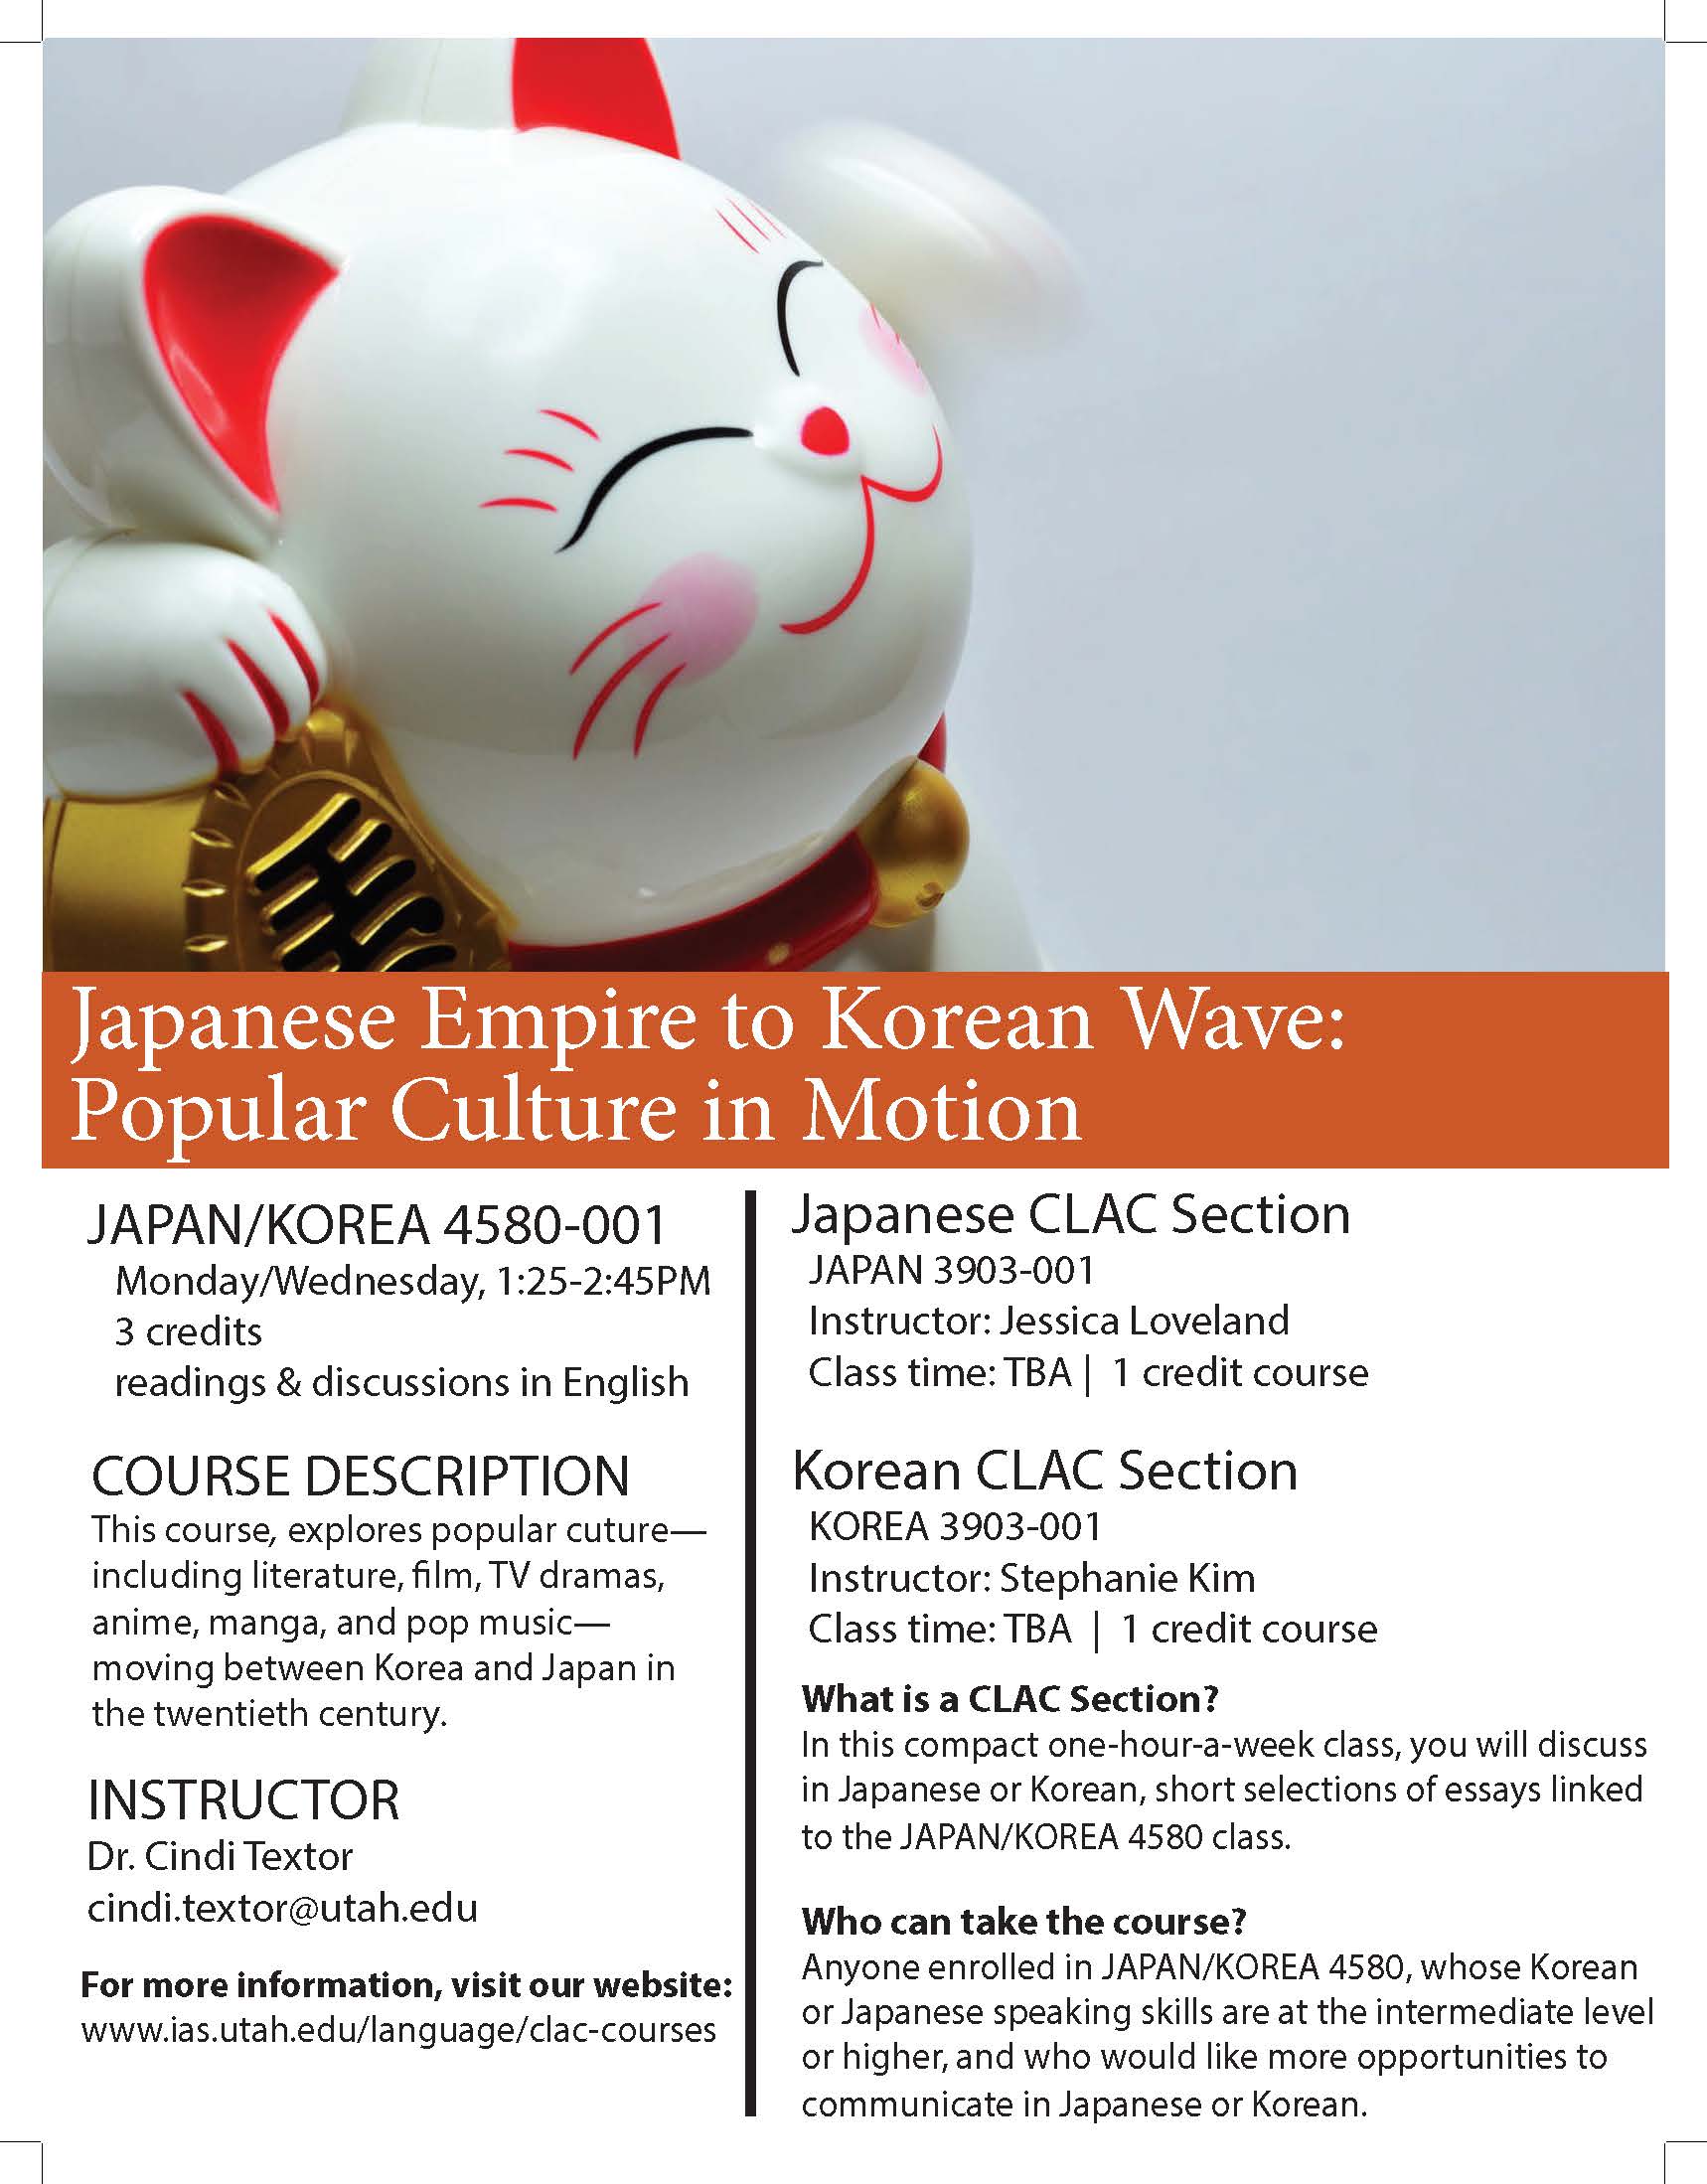 JAPAN/KPREA 4580  Japanese Empire to Korean Wave: Popular Culture in Motion